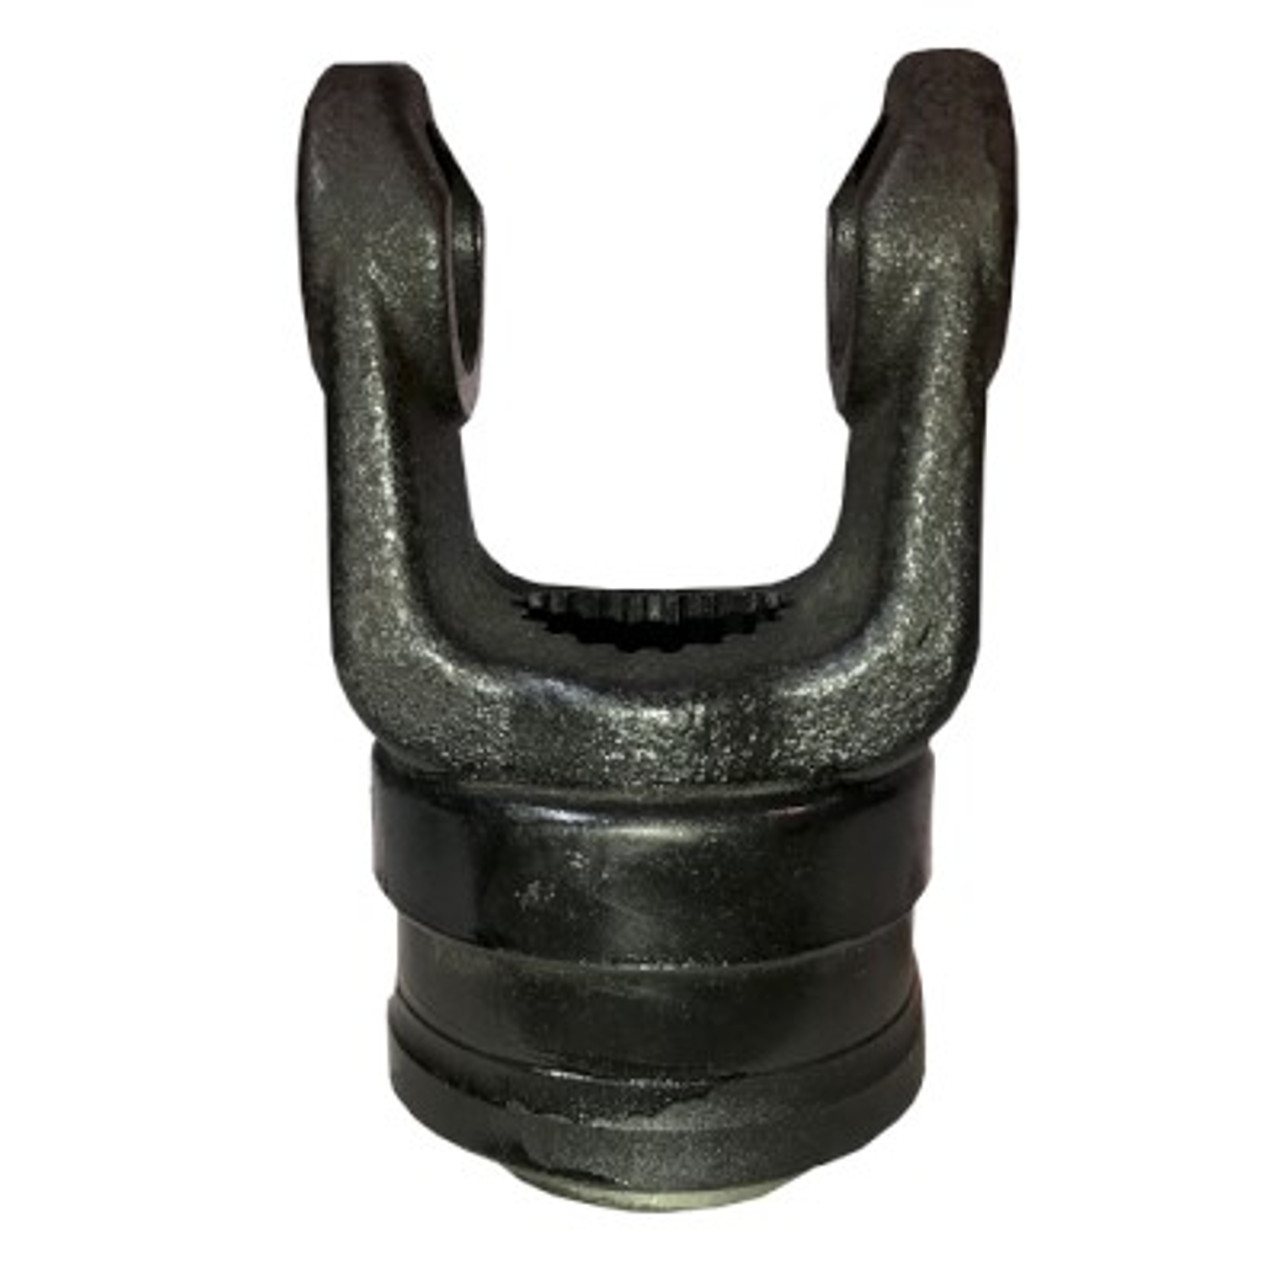 Tractor Yokes: Quick Disconnect (Collar Type) 1001421